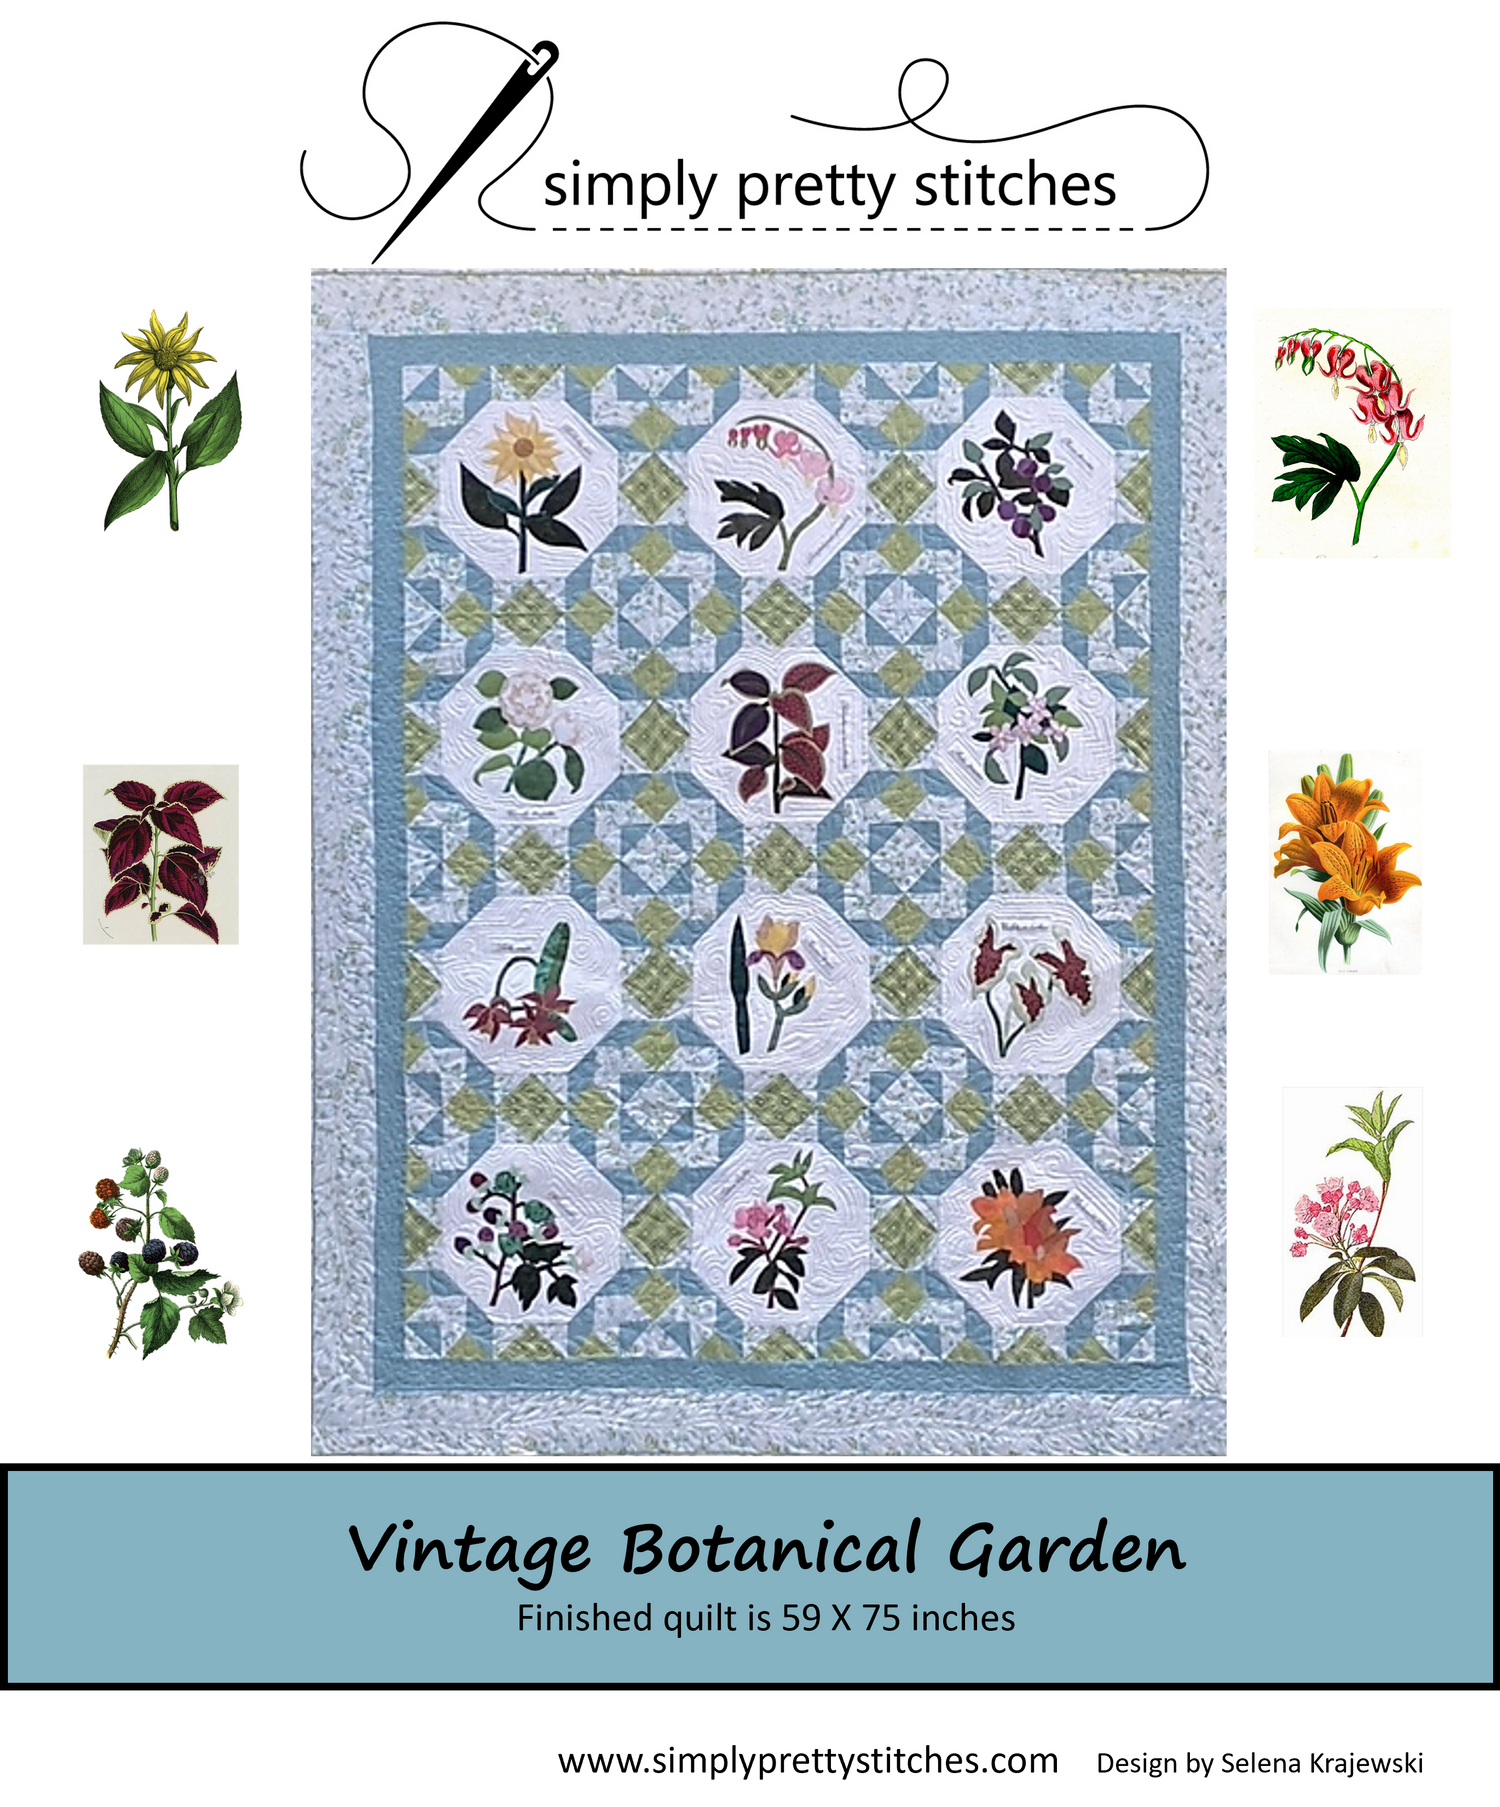 Get Ready For Summer With This Lovely Vintage Botanical Garden!